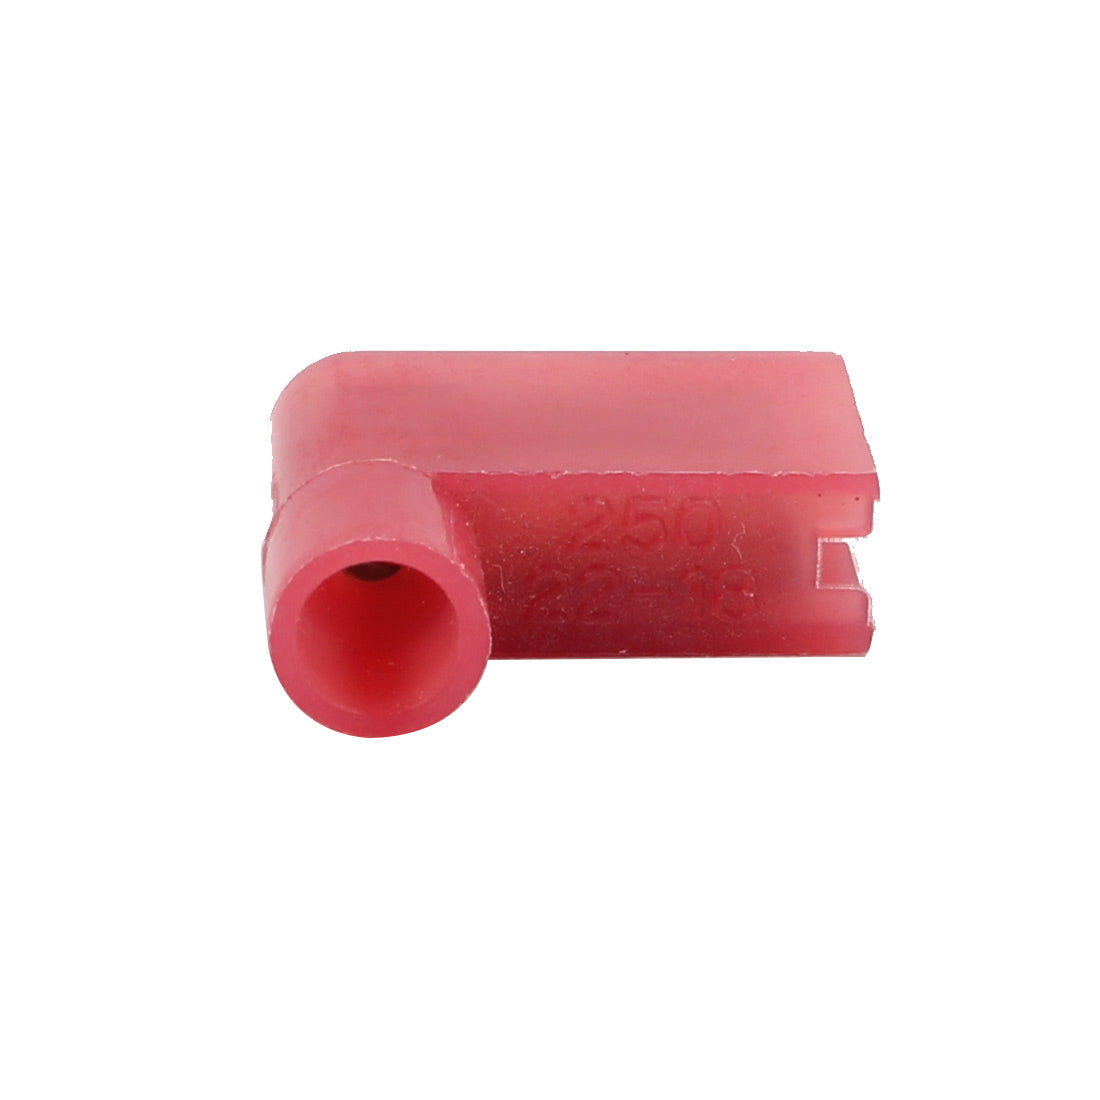 uxcell Uxcell 20Pcs Flag Crimp Terminals Female Nylon Fully Insulated Wire Connectors Red